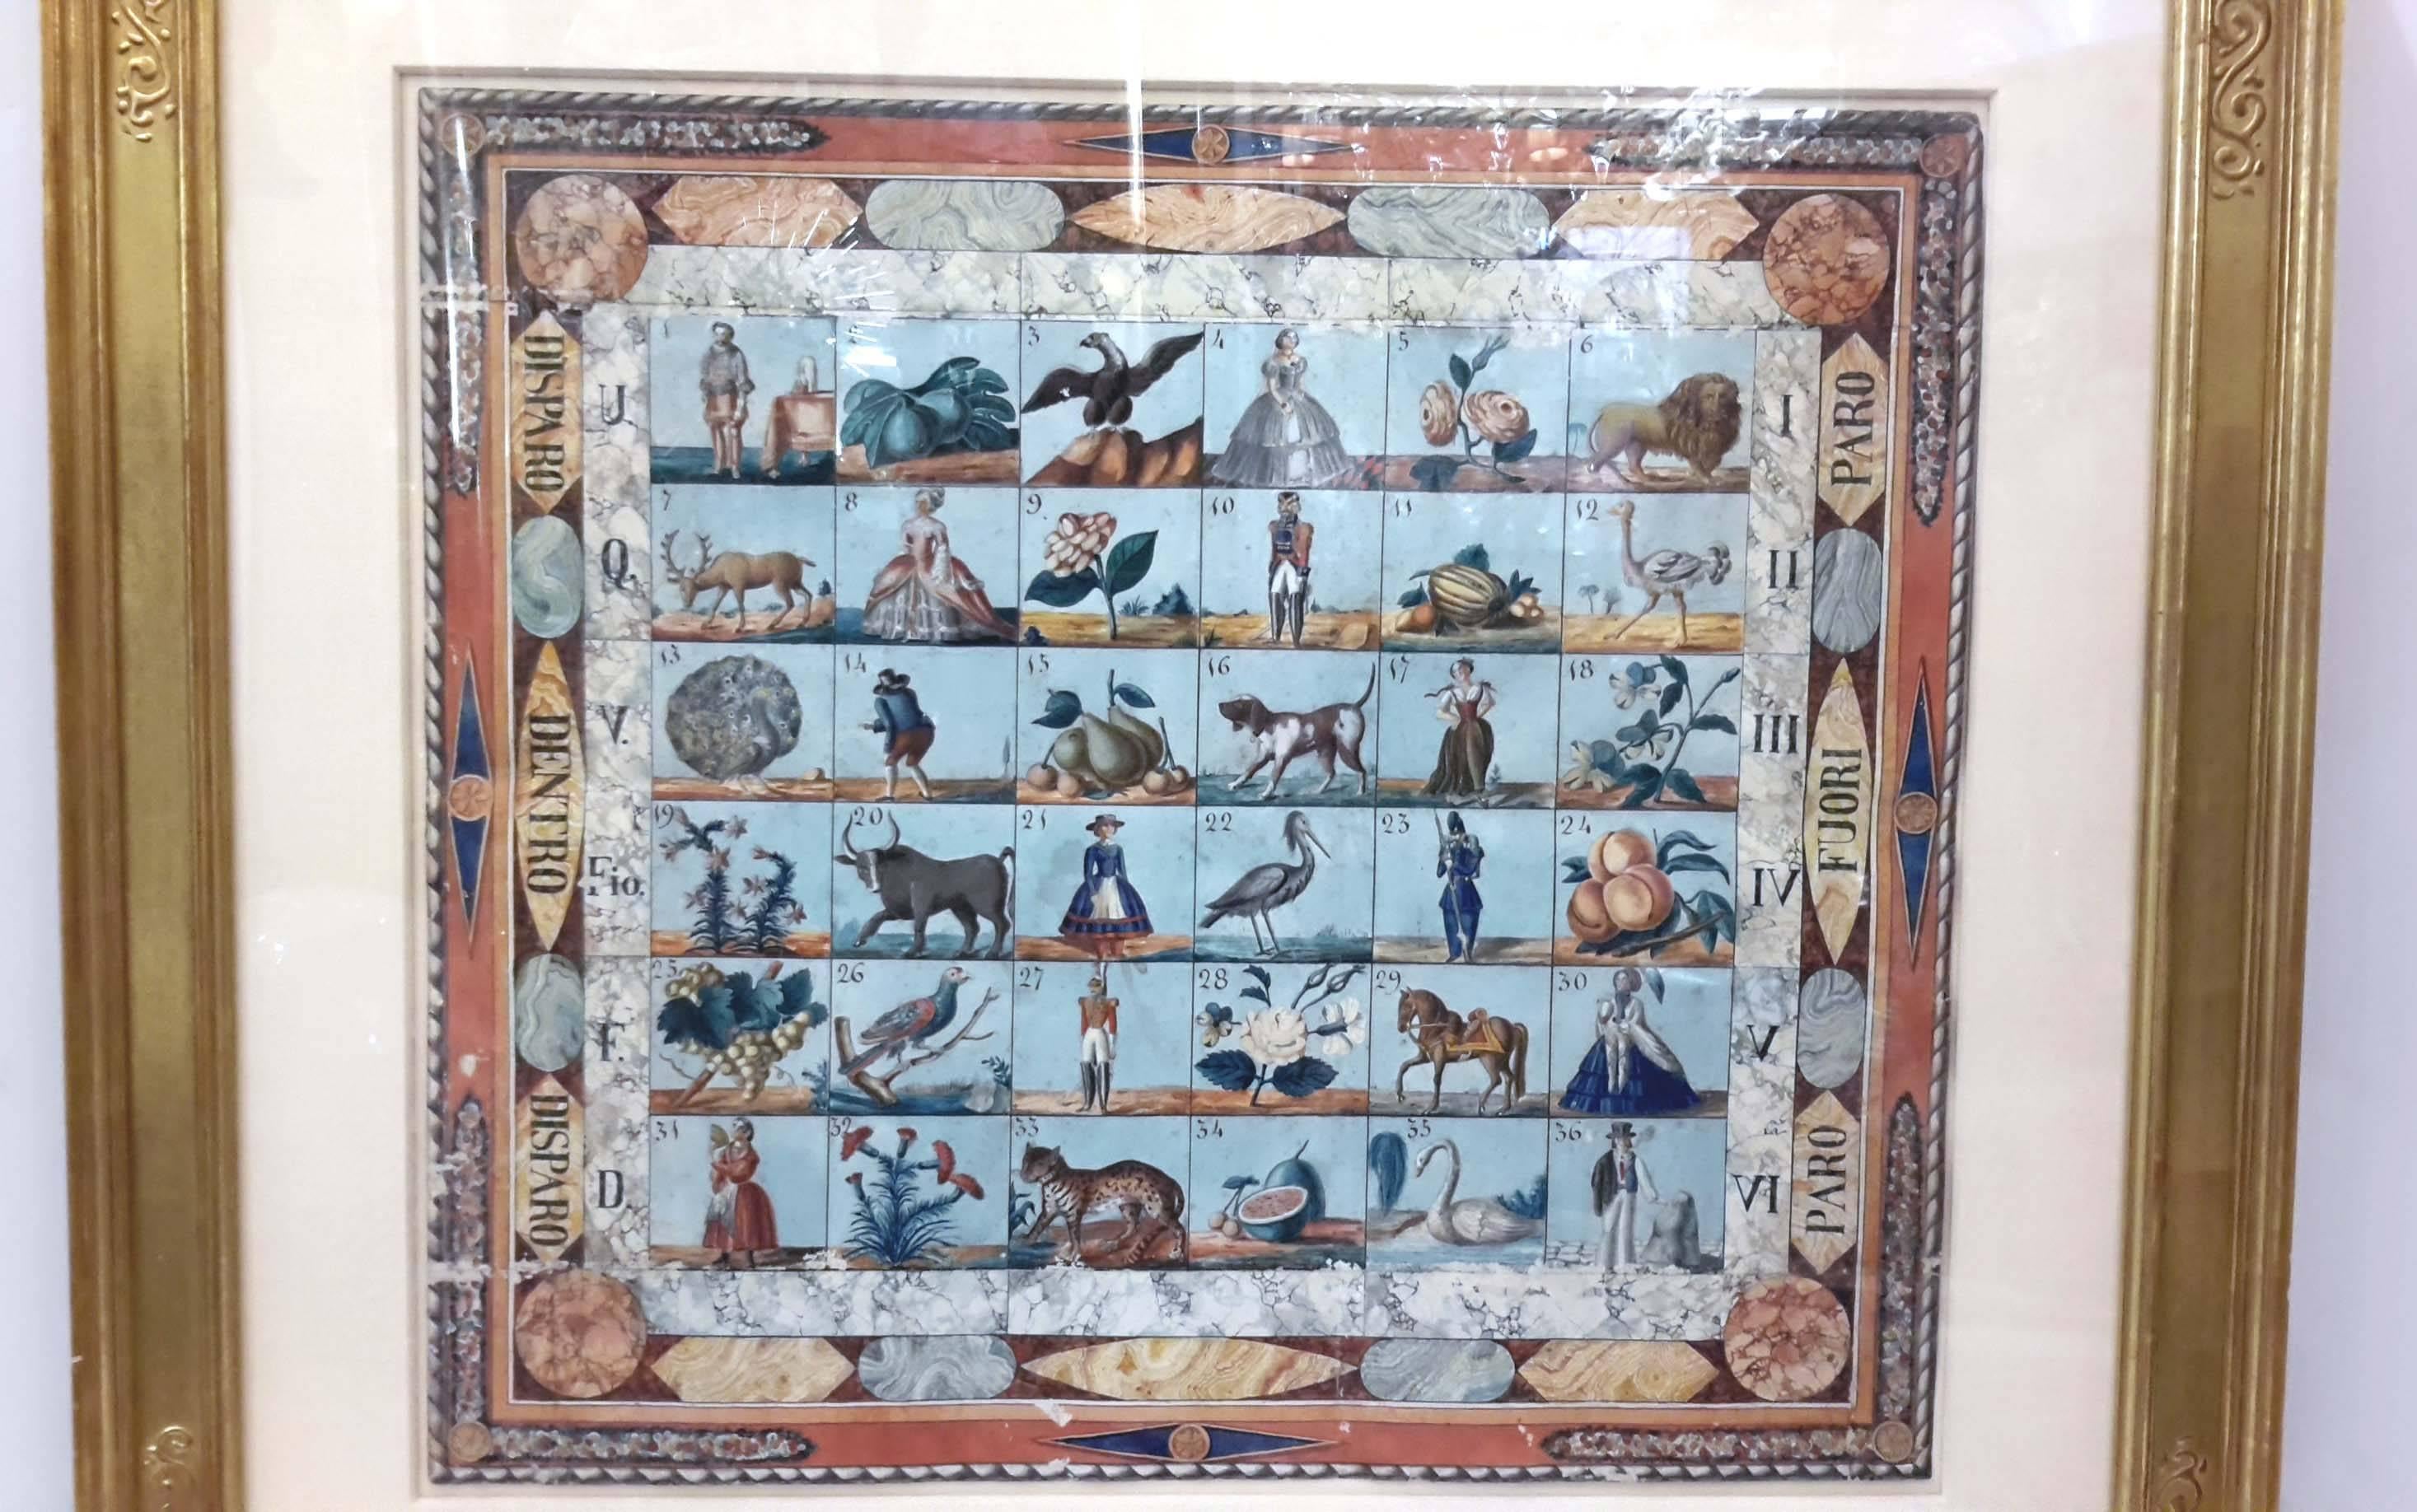 This is an early 19th century hand-painted traveling game board water color of an Italian game called Gioco Reale or Royal Game. It was a game played very much like Roulette, except that it used dice. It was played in casinos in Italy as early as